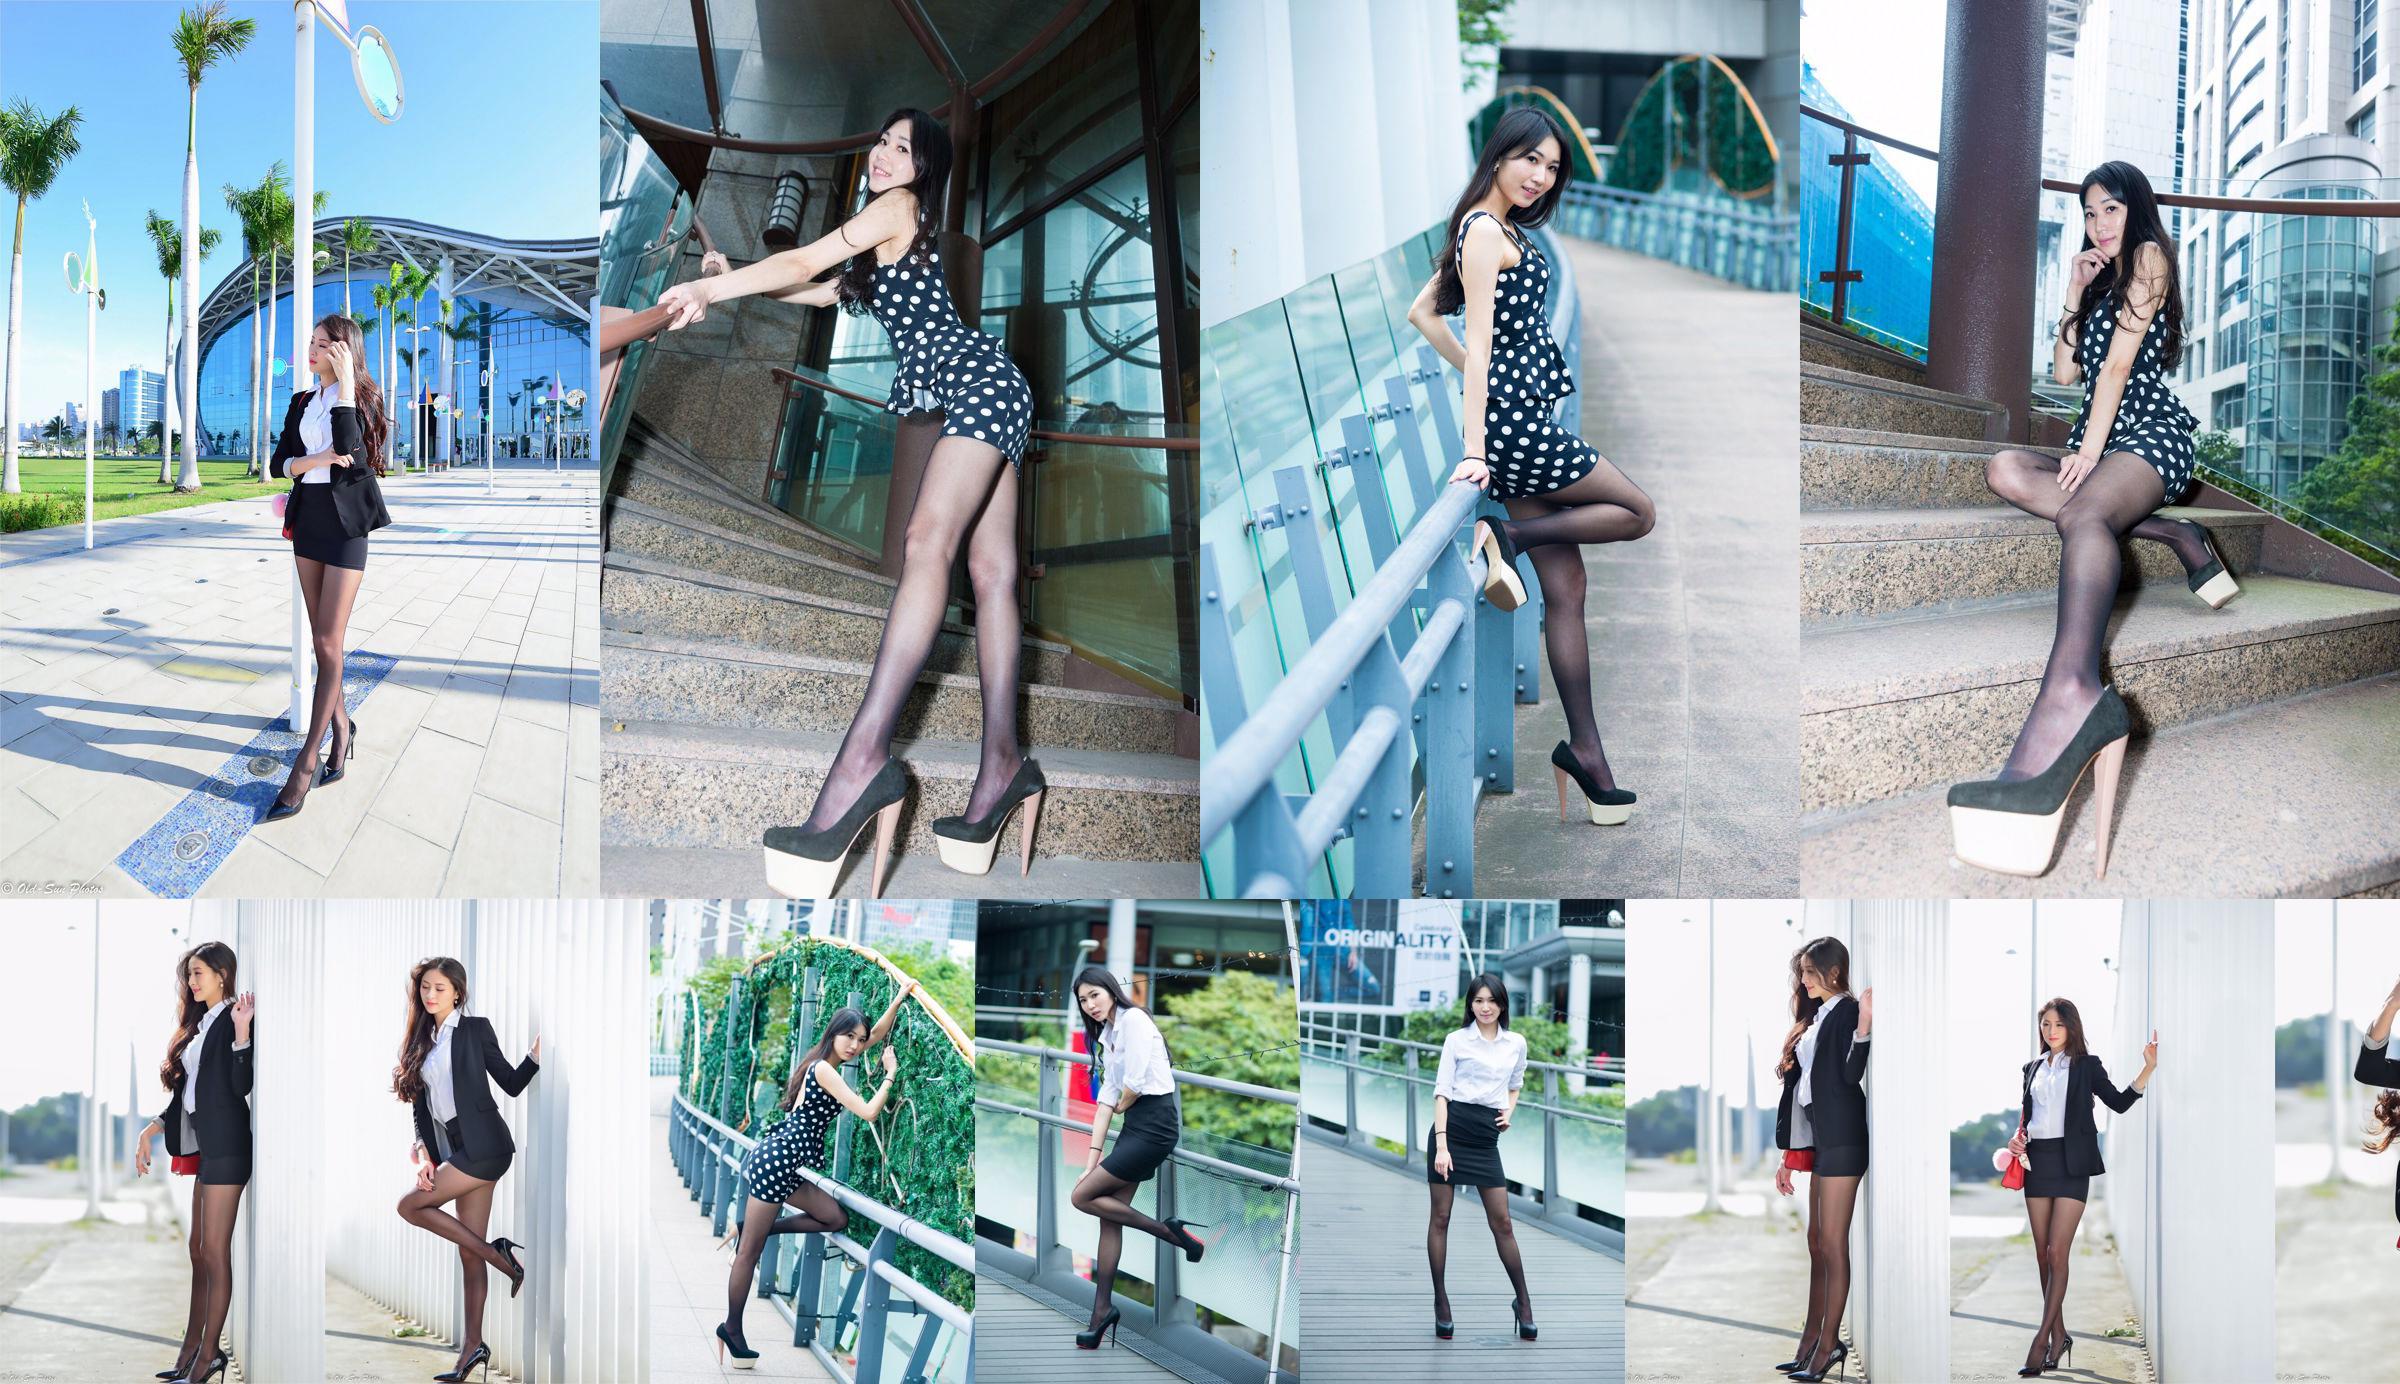 [Taiwan Goddess] Xiao Fan "OL Street Shooting Next to the Exhibition Hall" No.ff4ea2 Page 5